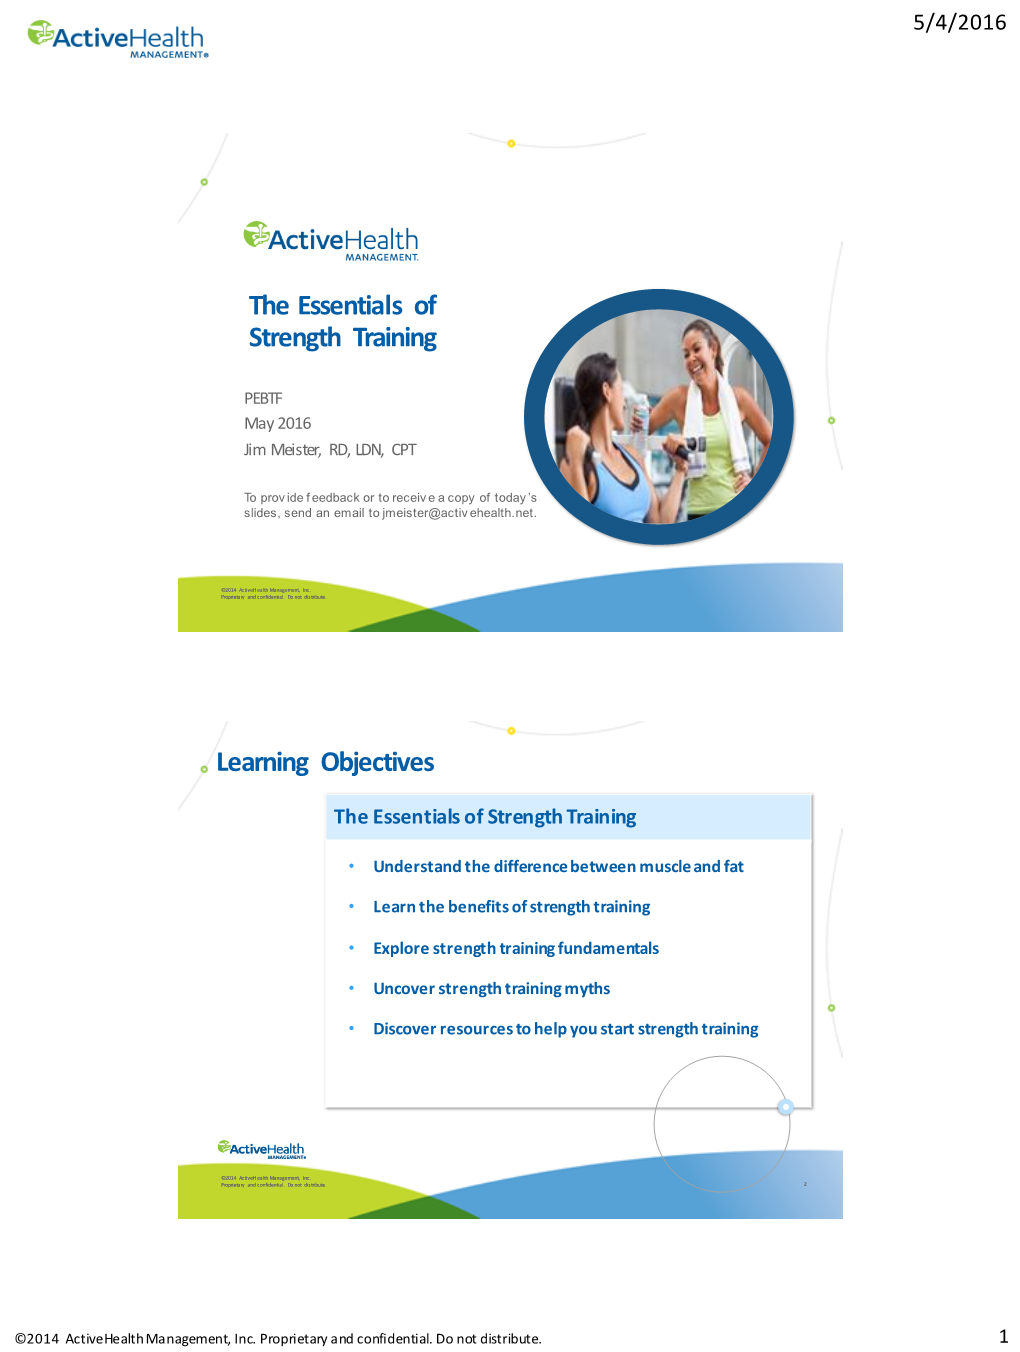 The Essentials of Strength Training Learning Objectives